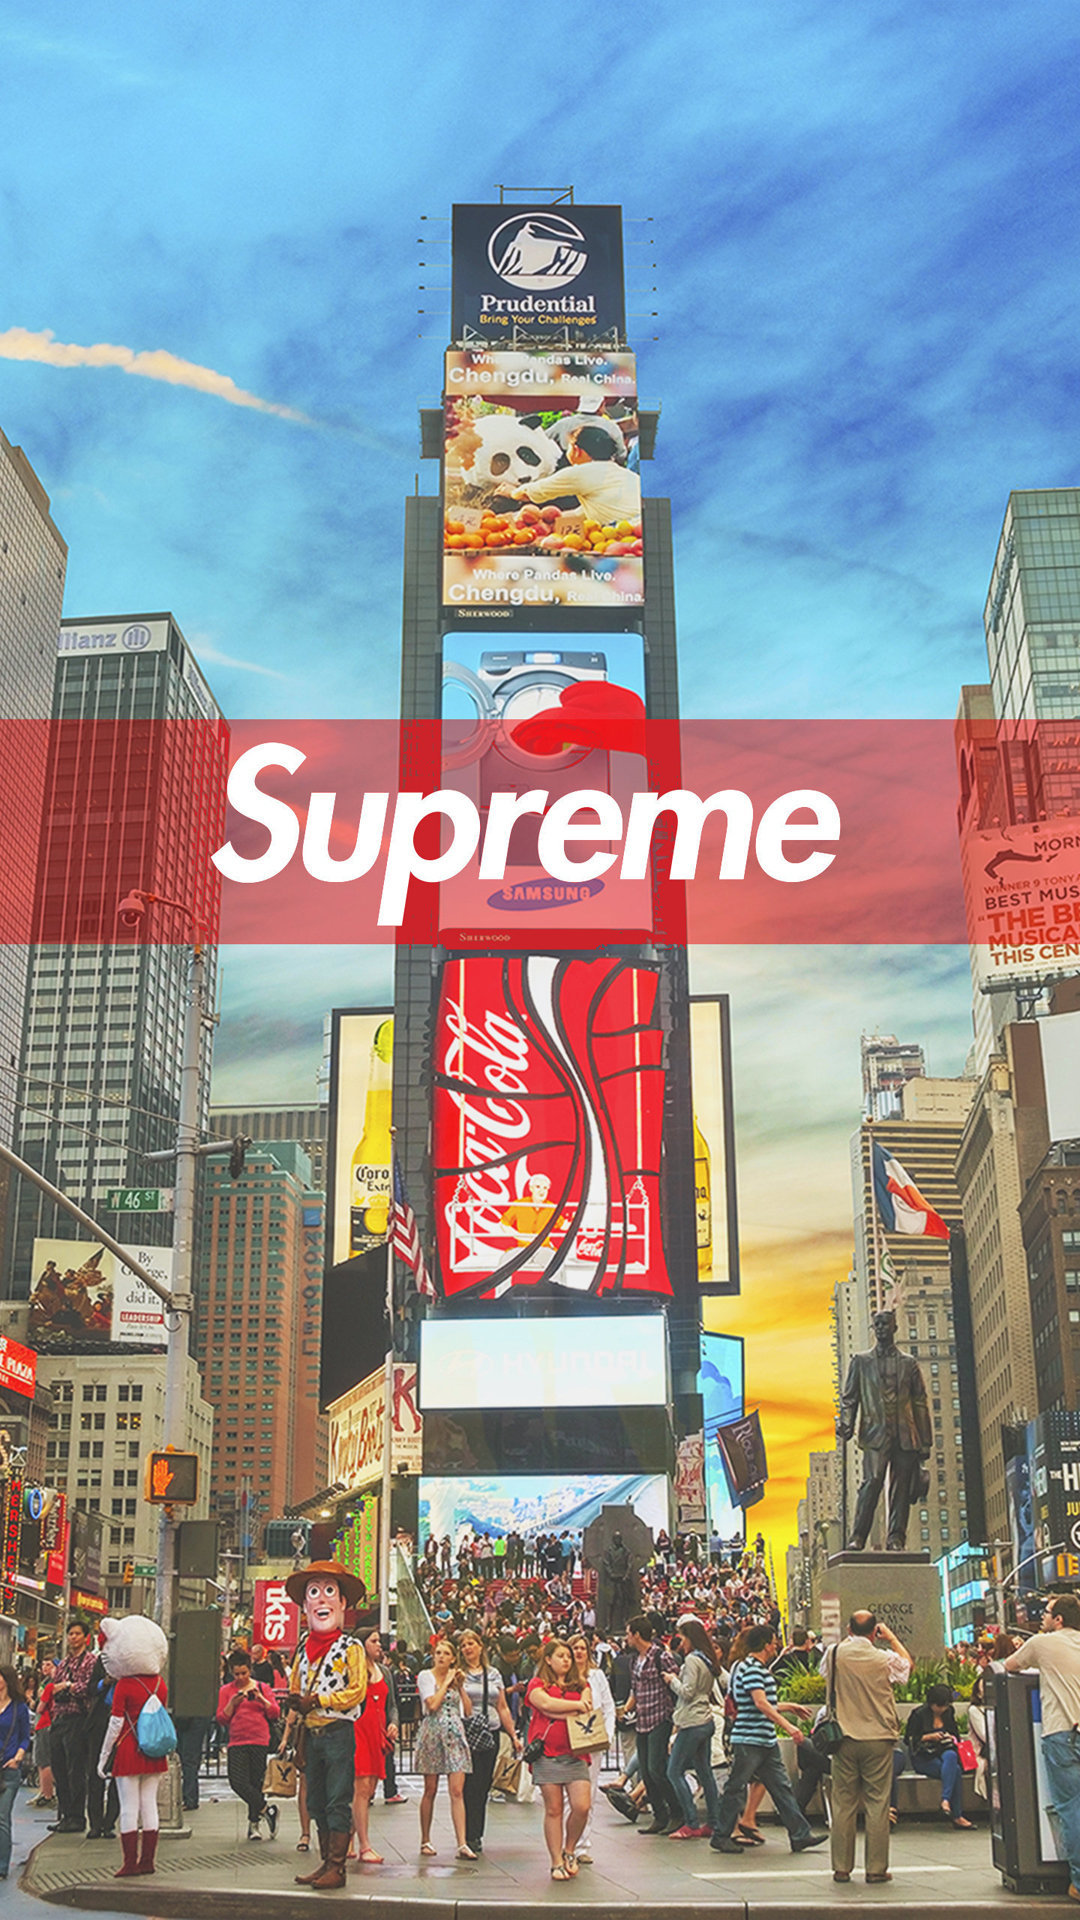 Free Download Nyc Supreme Wallpaper Authenticsupremecom 1080x19 For Your Desktop Mobile Tablet Explore 43 Supreme Nyc Wallpaper Iphone Supreme Nyc Wallpaper Iphone Nyc Iphone Wallpaper Supreme Iphone Wallpapers